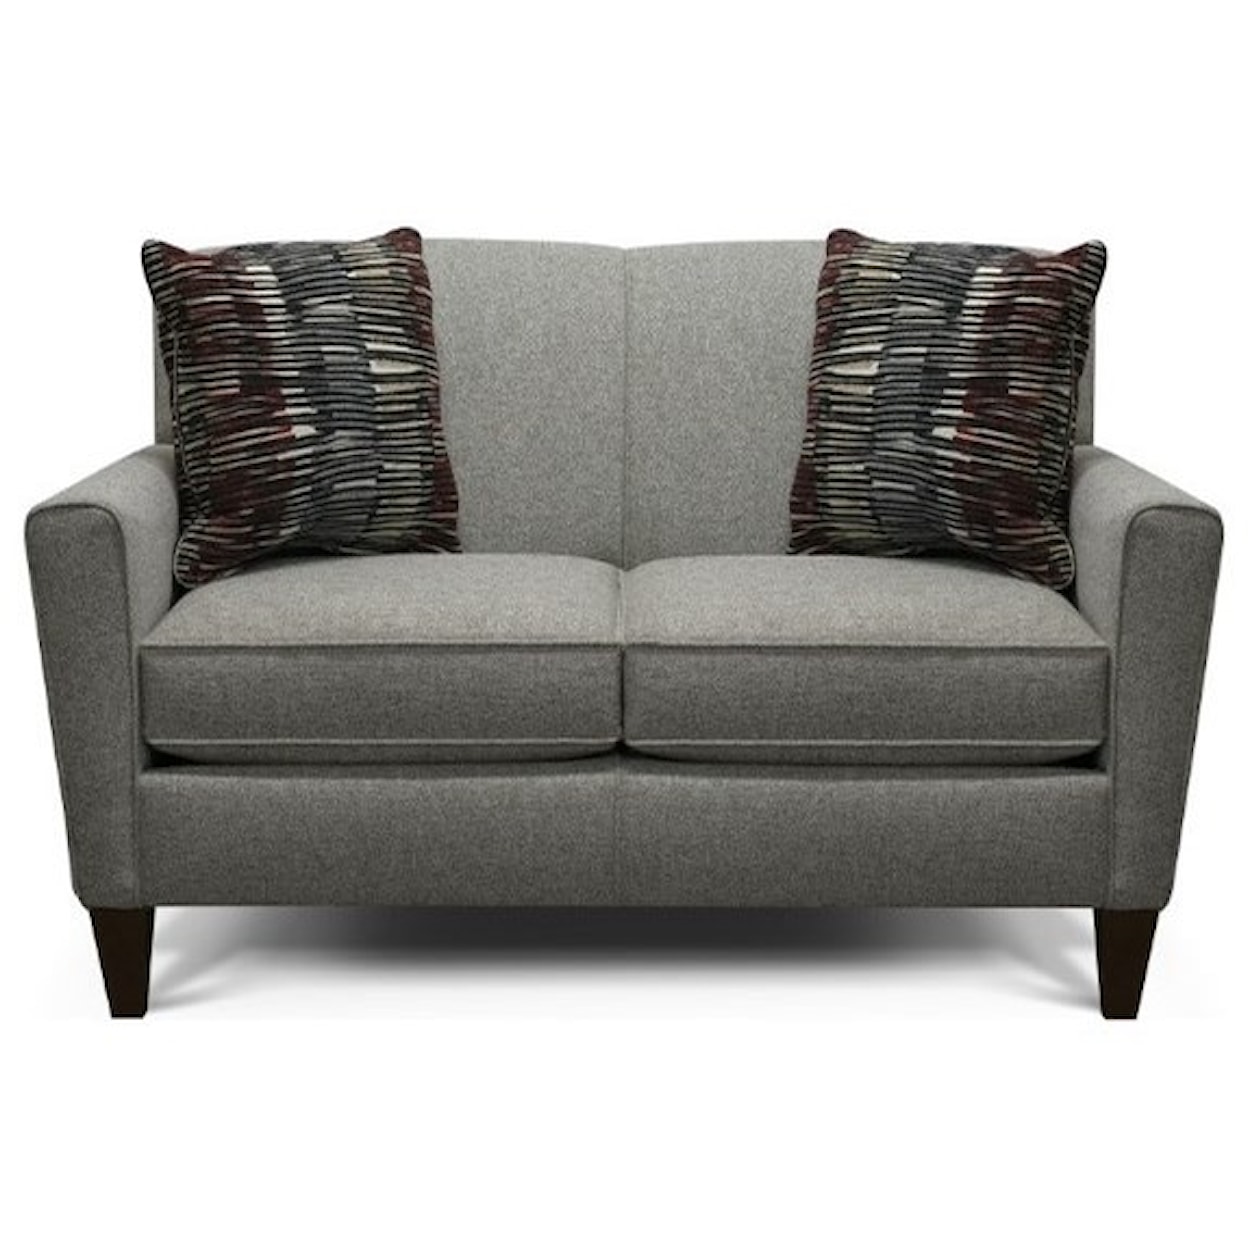 England Collegedale Loveseat